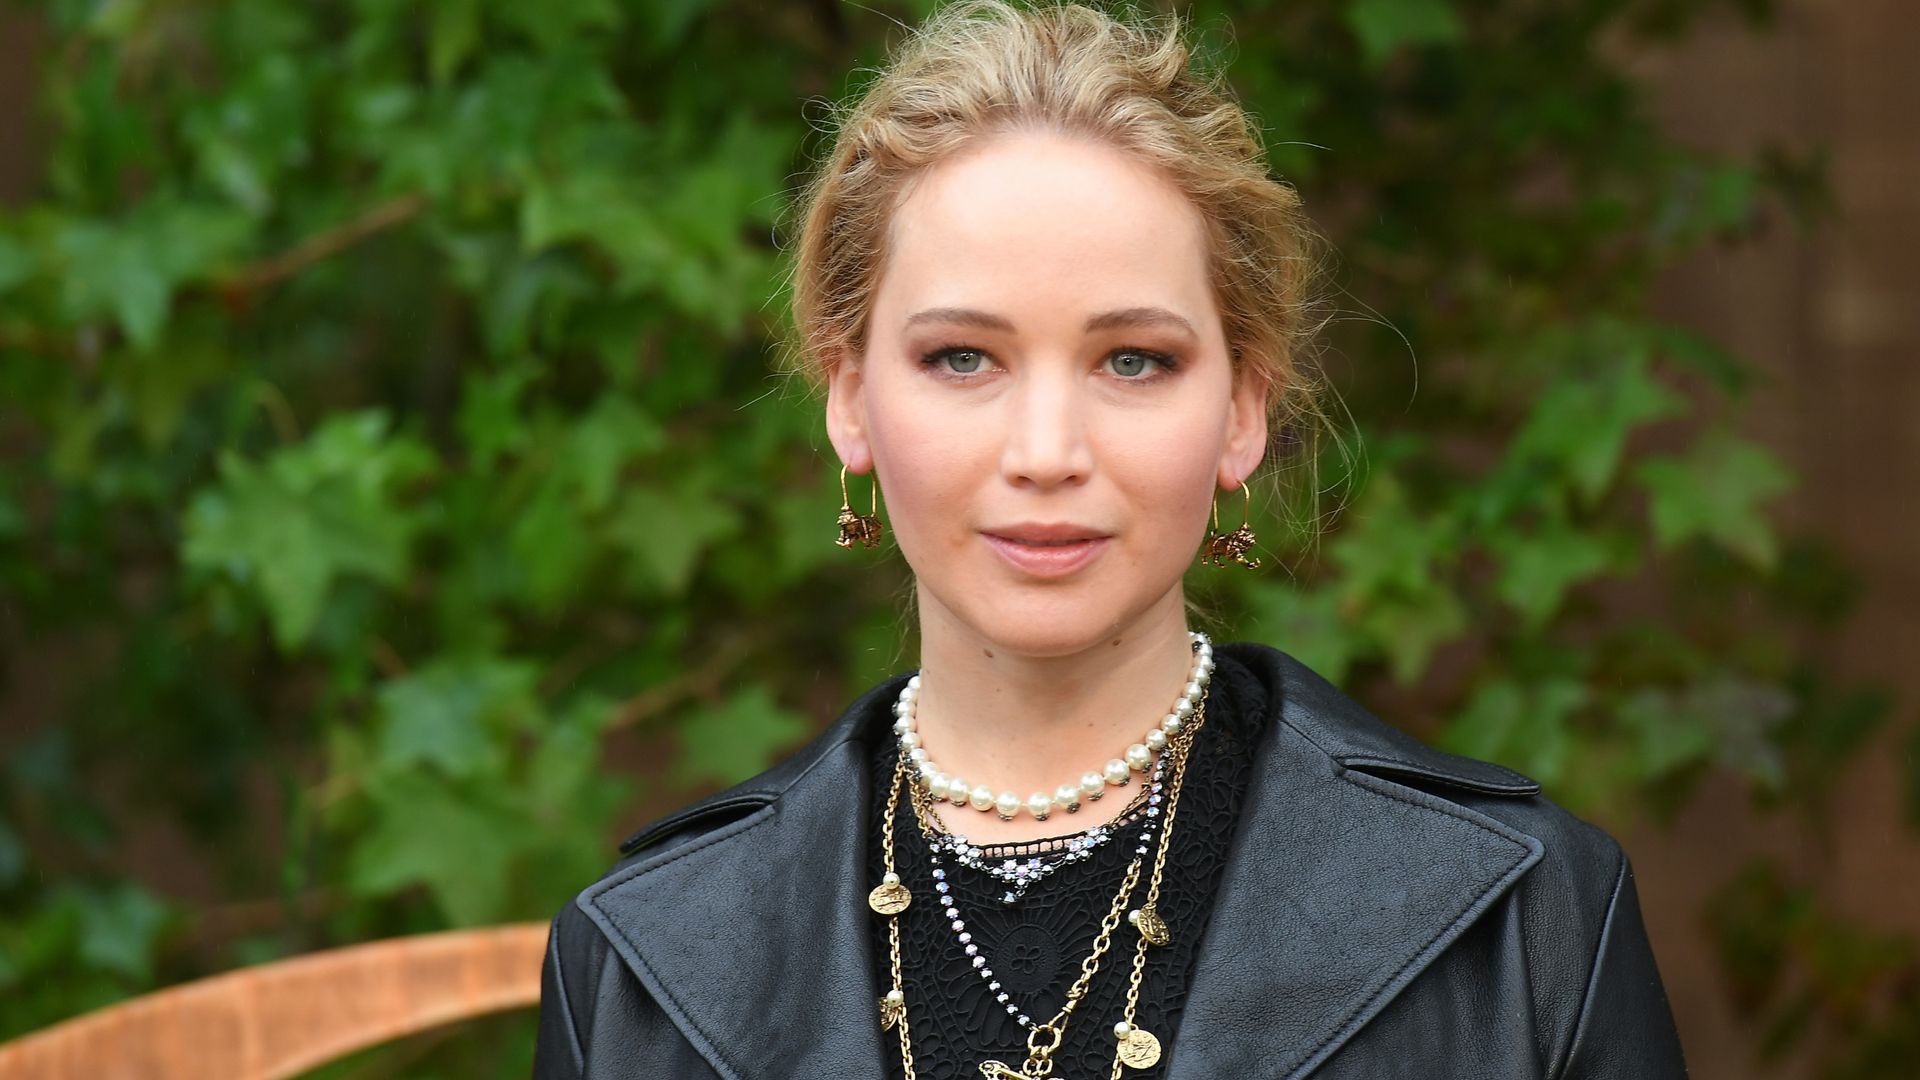 PARIS, FRANCE - SEPTEMBER 24: Jennifer Lawrence attends the Christian Dior Womenswear Spring/Summer 2020 show as part of Paris Fashion Week on September 24, 2019 in Paris, France. (Photo by Stephane Cardinale - Corbis/Corbis via Getty Images)